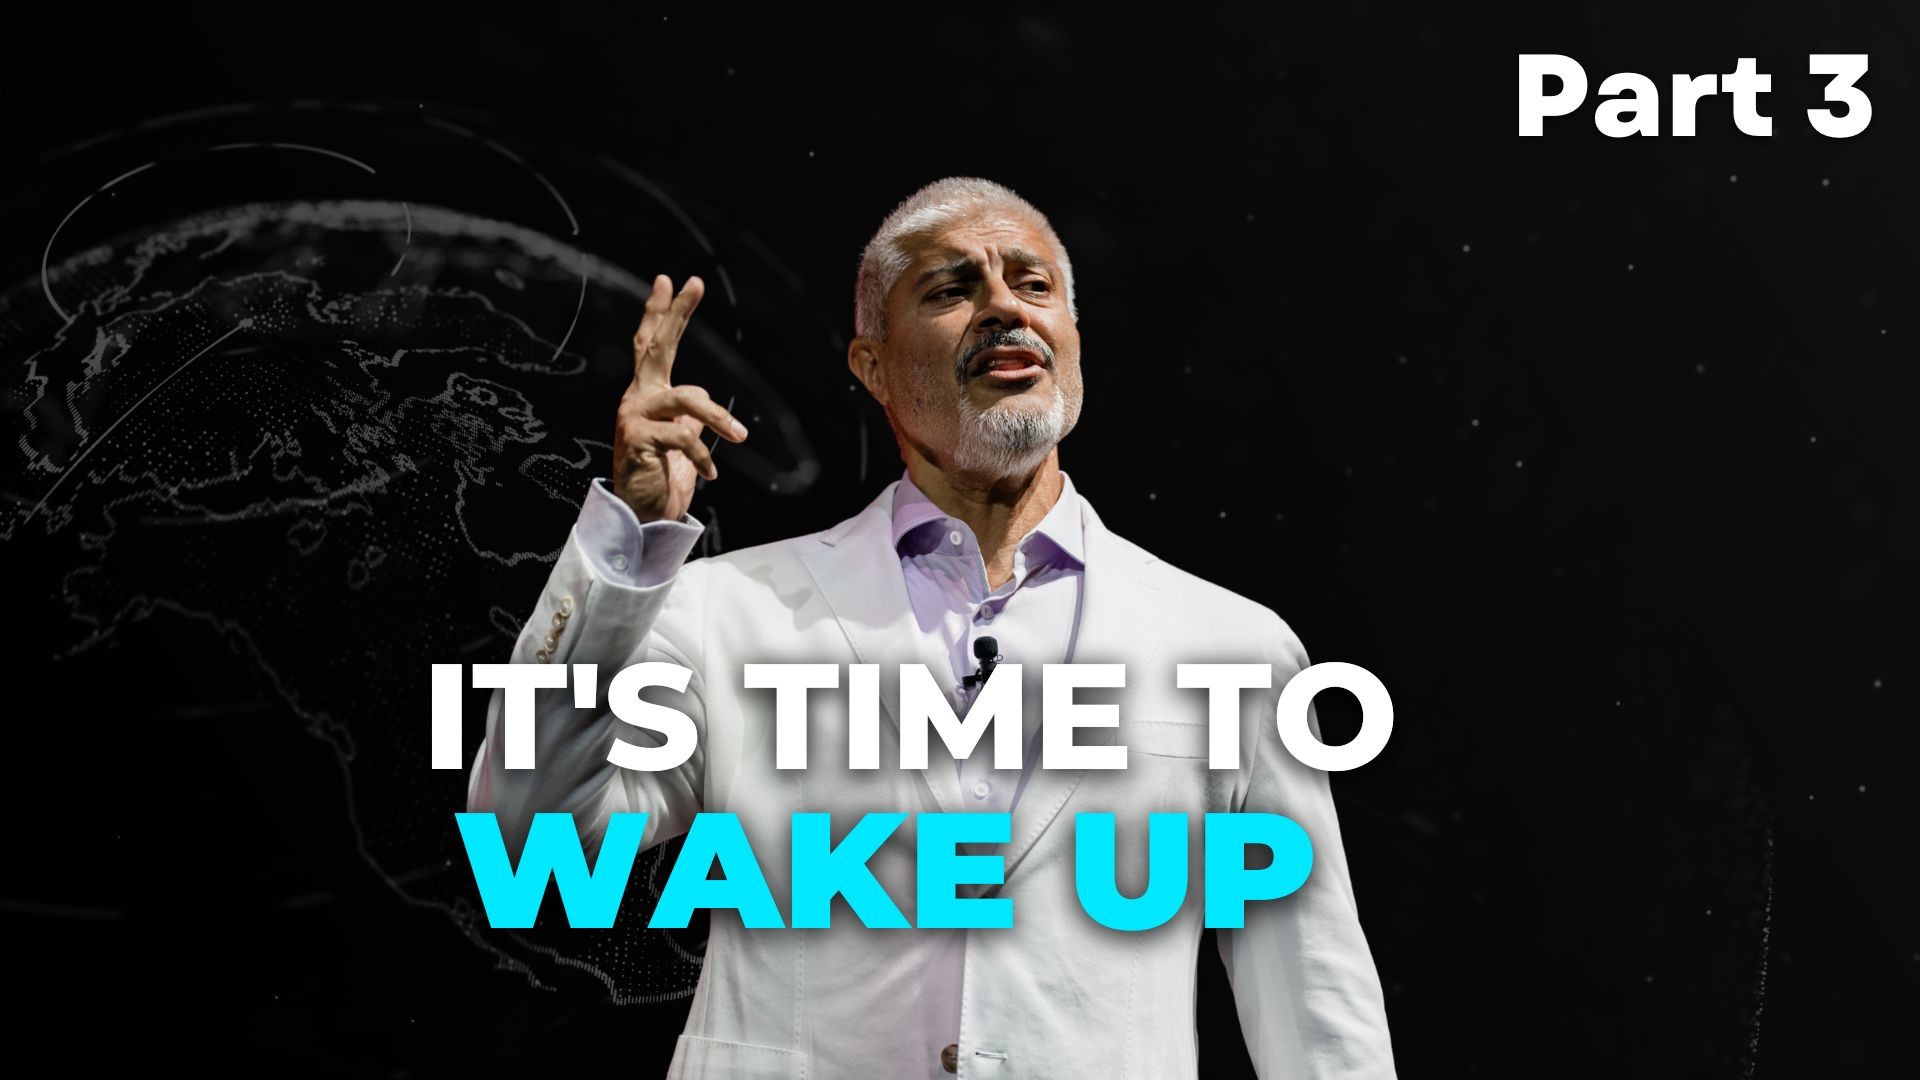 â�£It's Time To Wake Up (Part 3 of 4) - Dr Rashid A Buttar